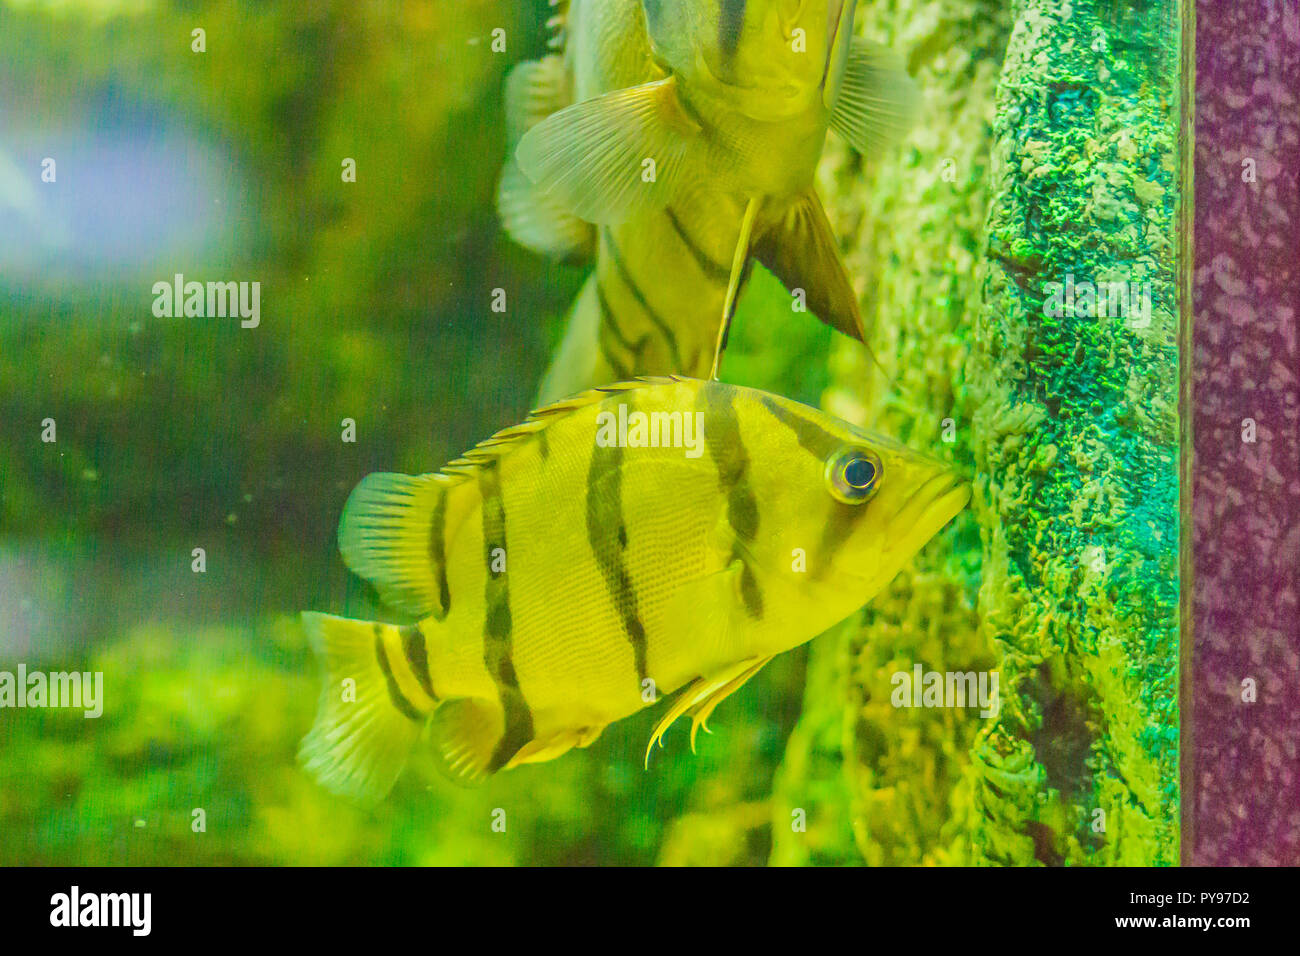 Cute Northeastern siamese tigerfish in aquarium. The Siamese tigerfish (Datnioides pulcher) is a critically endangered Asian fish native to the Chao P Stock Photo